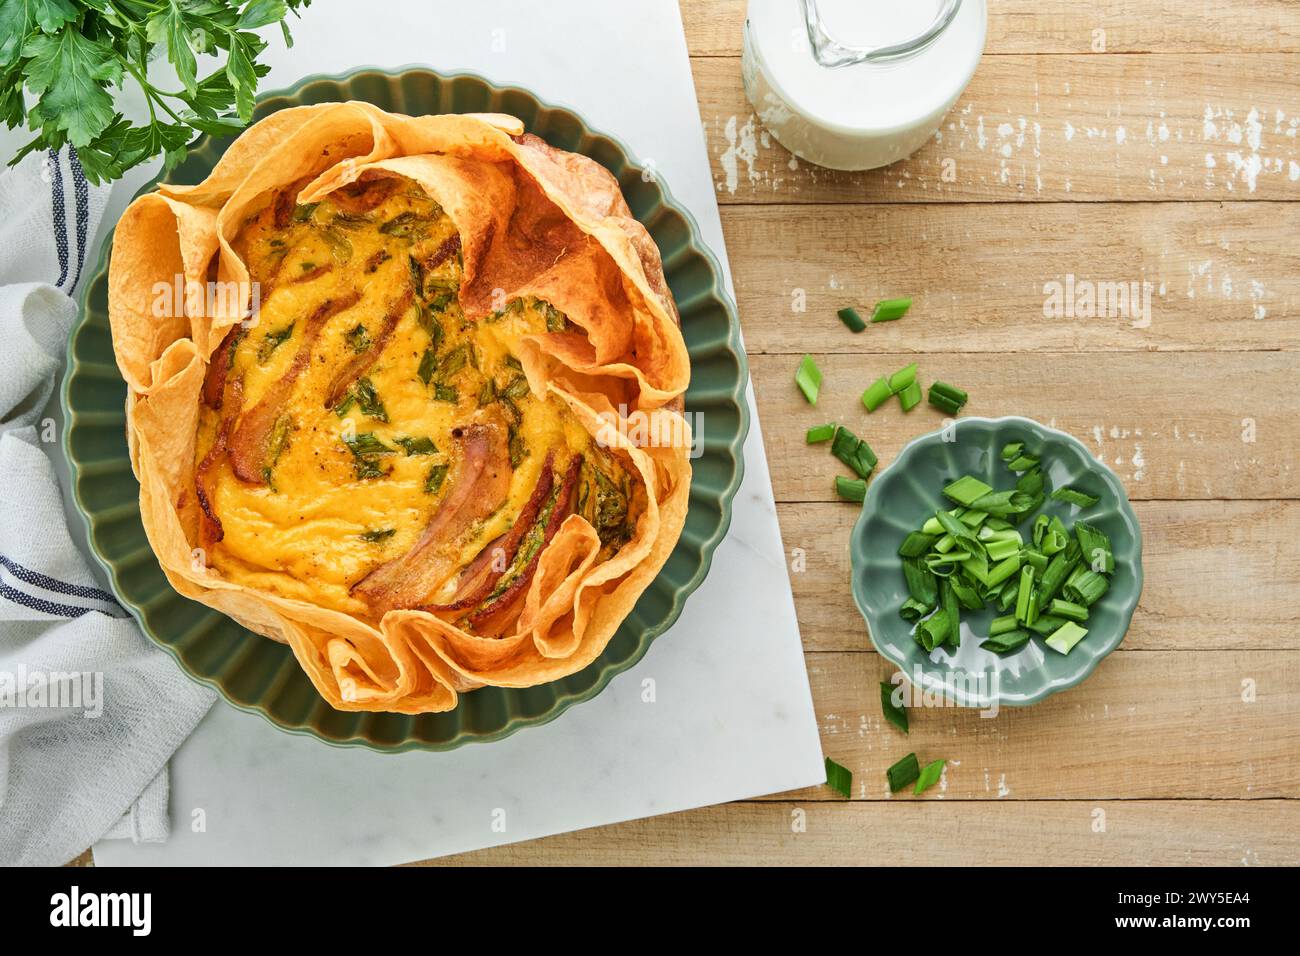 Homemade quiche or tart with slices of bacon and leeks with tortilla instead of dough on wooden cutting board on rustic old wooden background. Quiche Stock Photo